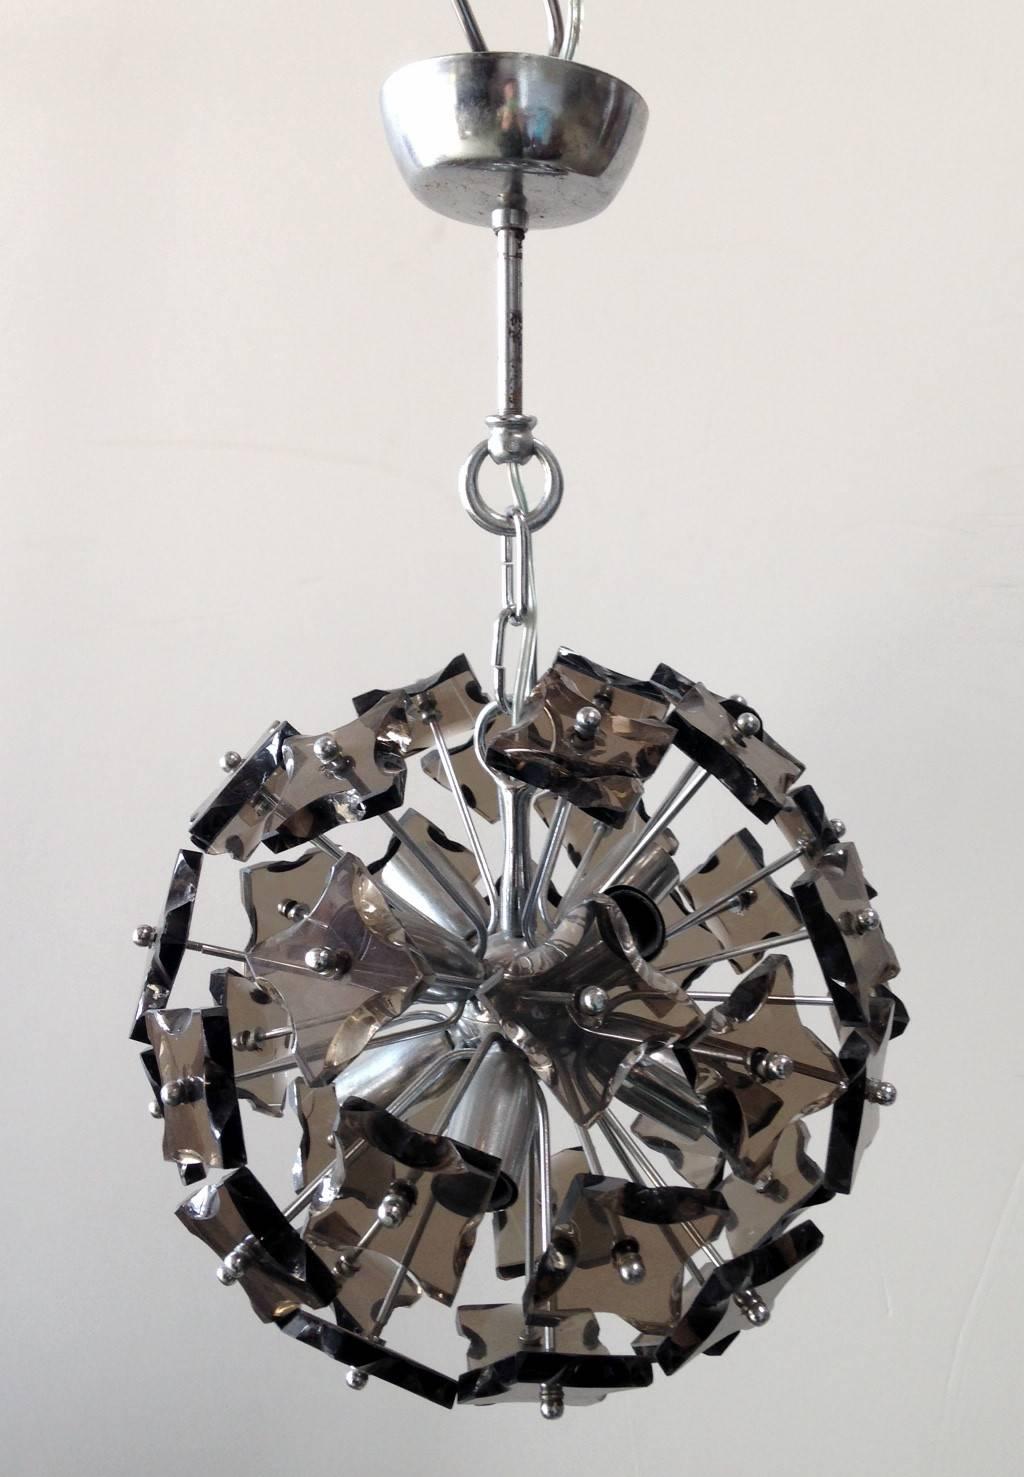 Vintage Italian sputnik chandelier with smoky faceted glasses, mounted on chrome frame / In the style of of Fontana Arte / Made in Italy circa 1960’s
8 lights / E14 type / max 40W each
Diameter: 13 inches plus chain and canopy
1 in stock in Palm